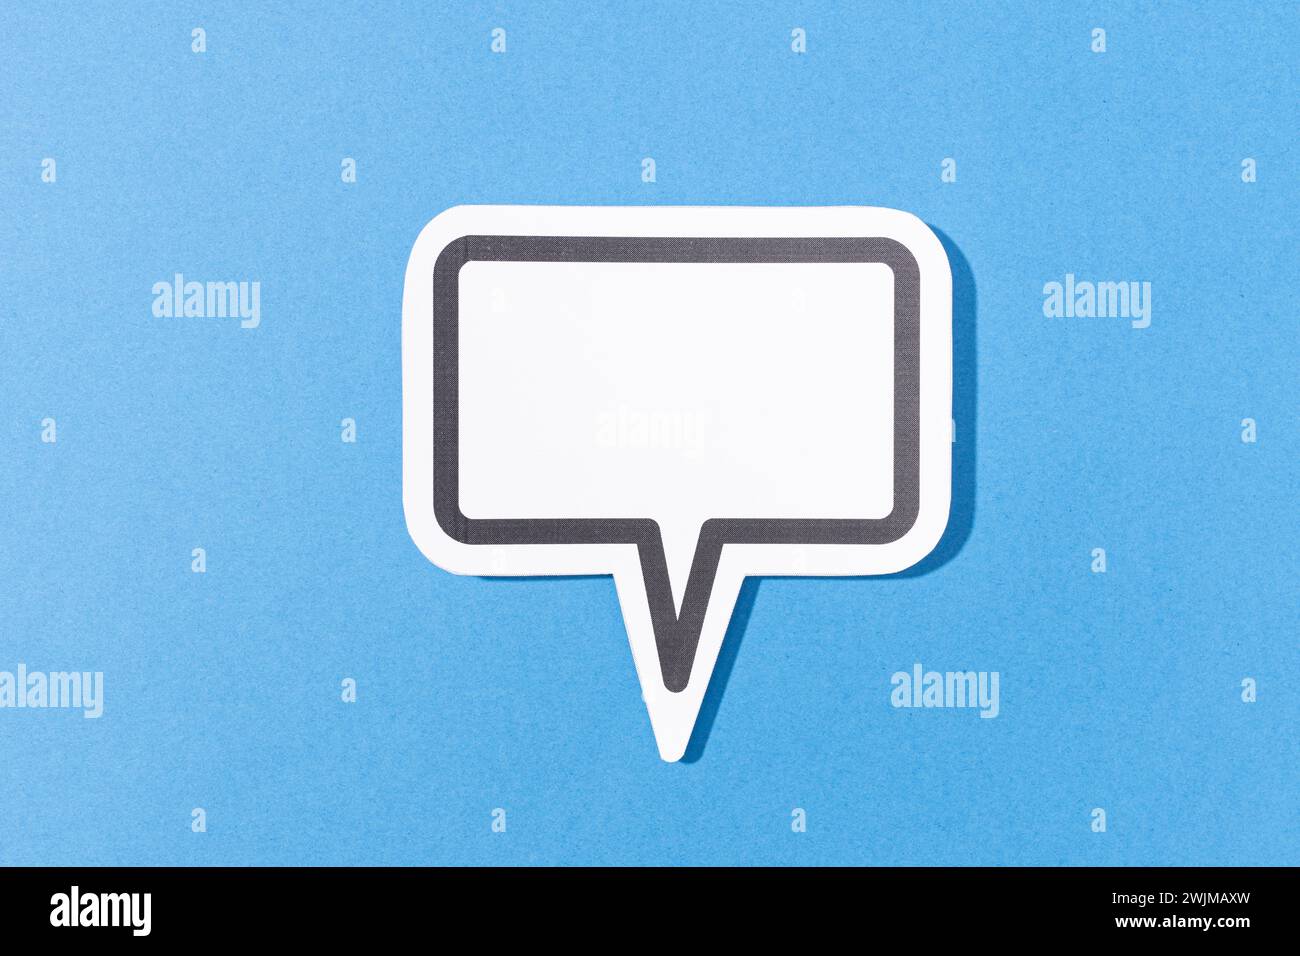 Blank Speech Bubble isolated on blue background. Mock up template Stock Photo